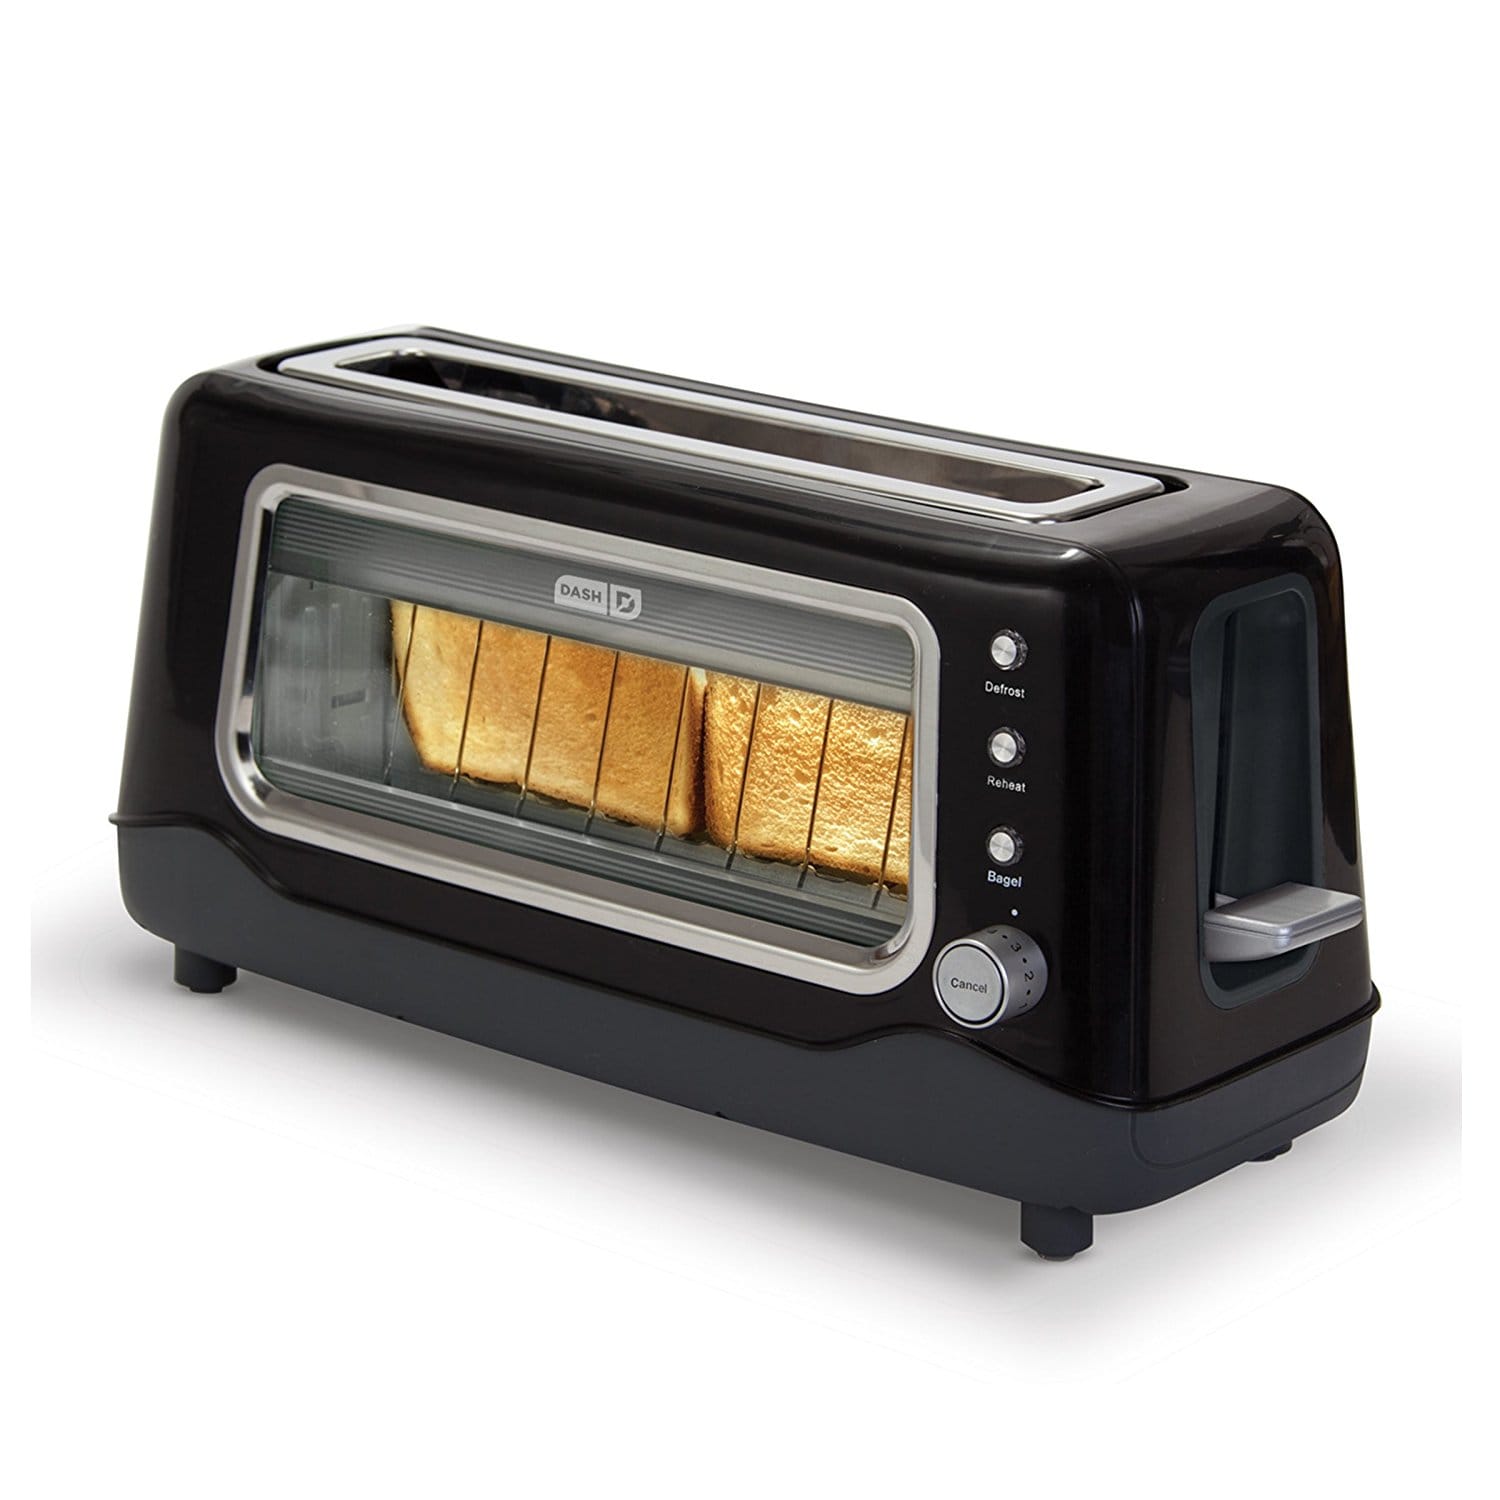 Best Long Slot Toasters For Delicious Golden Brown Bread